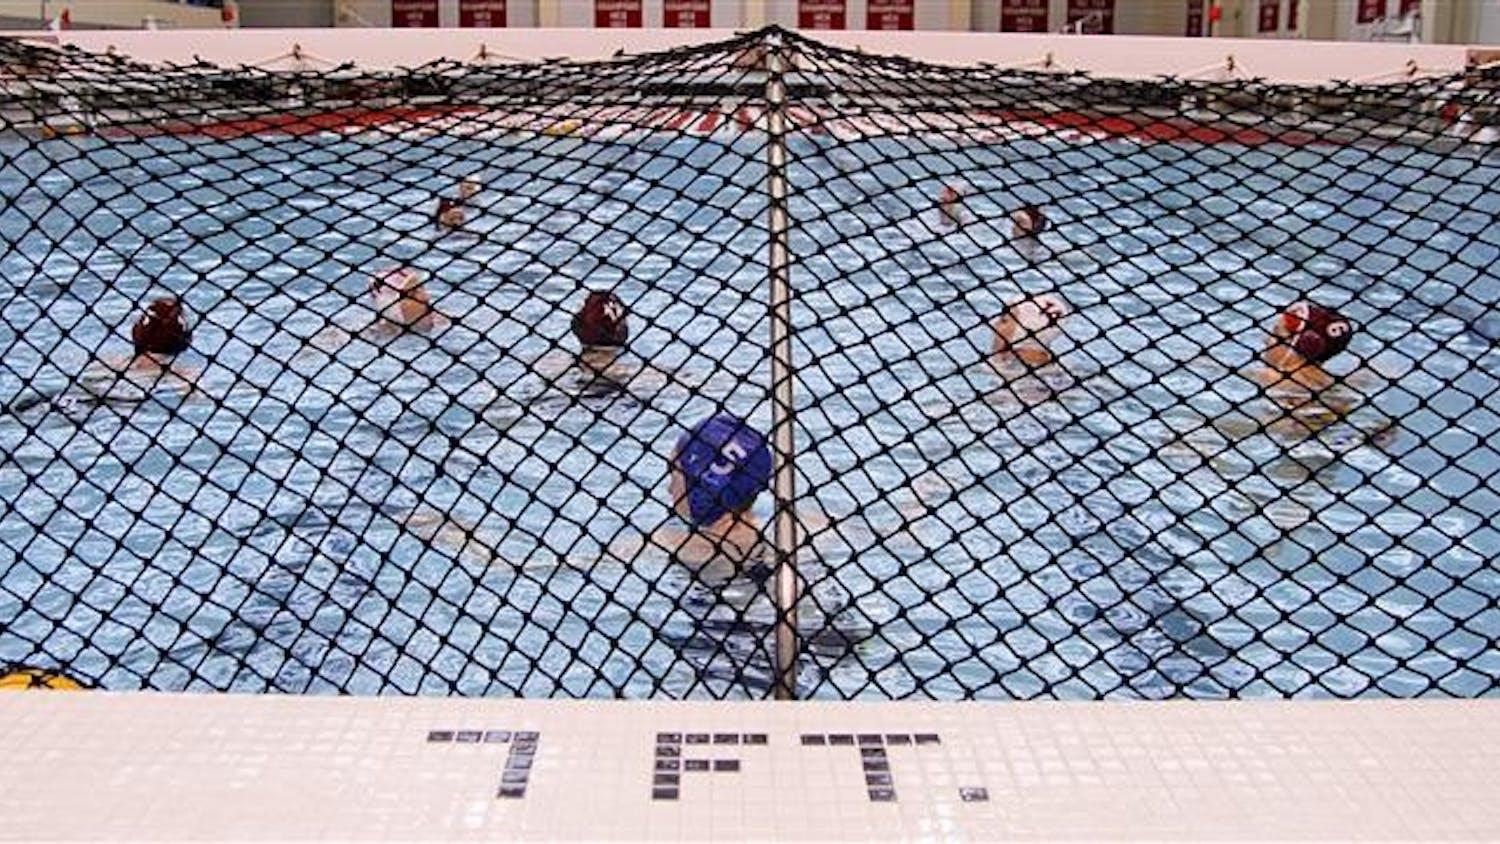 The IU water polo team practices Feb. 28 at the Counsilman/Billingsley Aquatic Center.